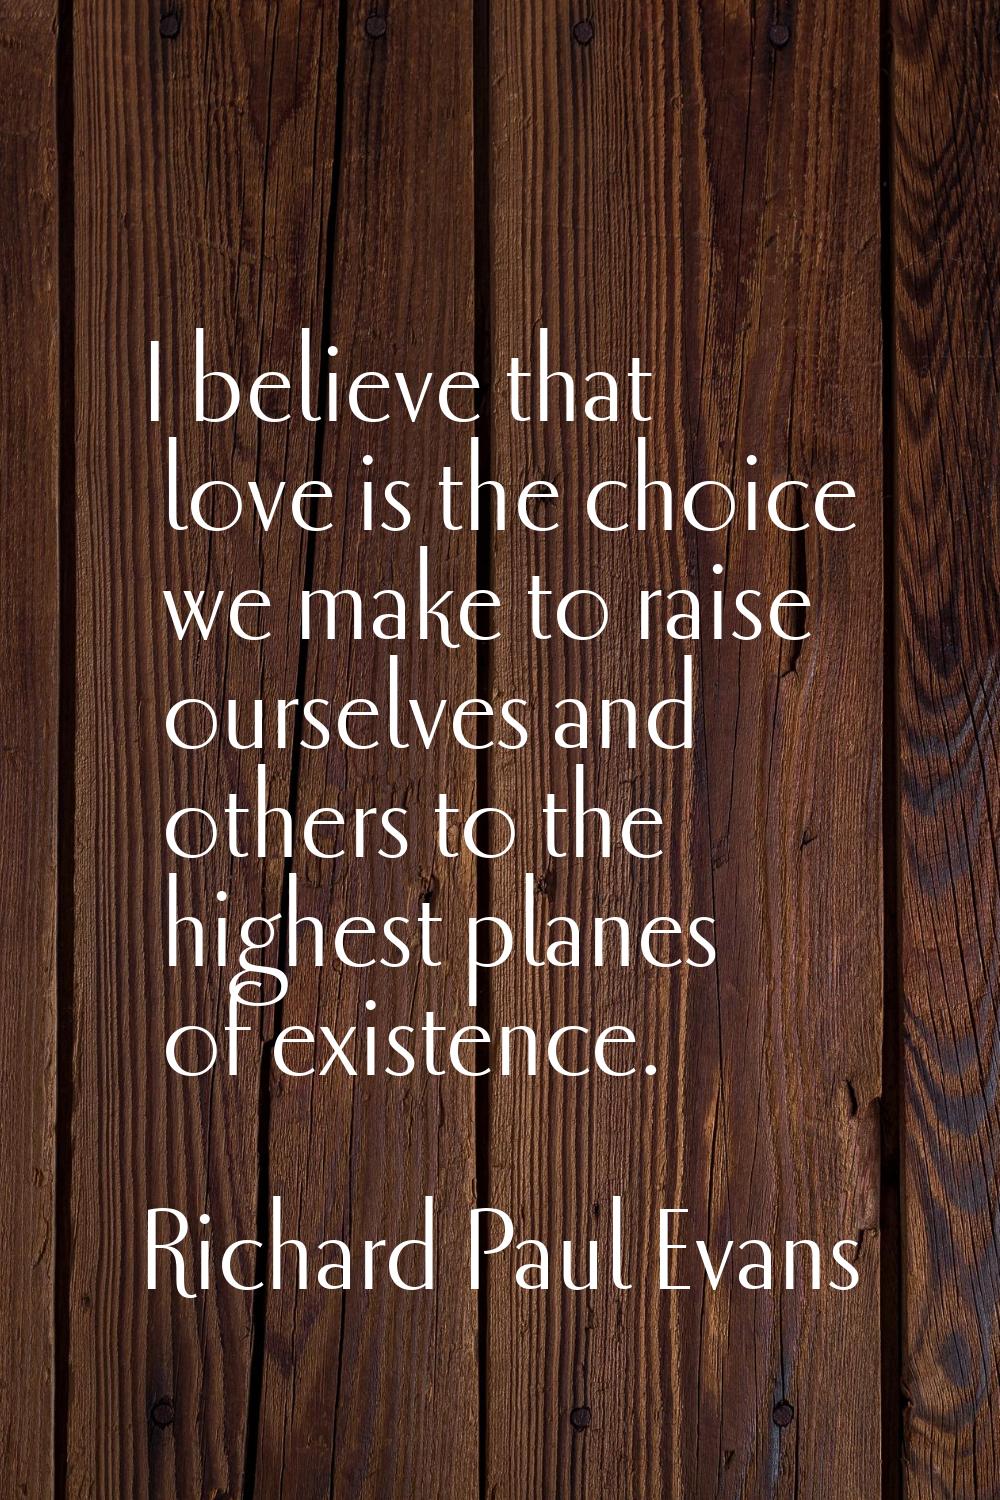 I believe that love is the choice we make to raise ourselves and others to the highest planes of ex